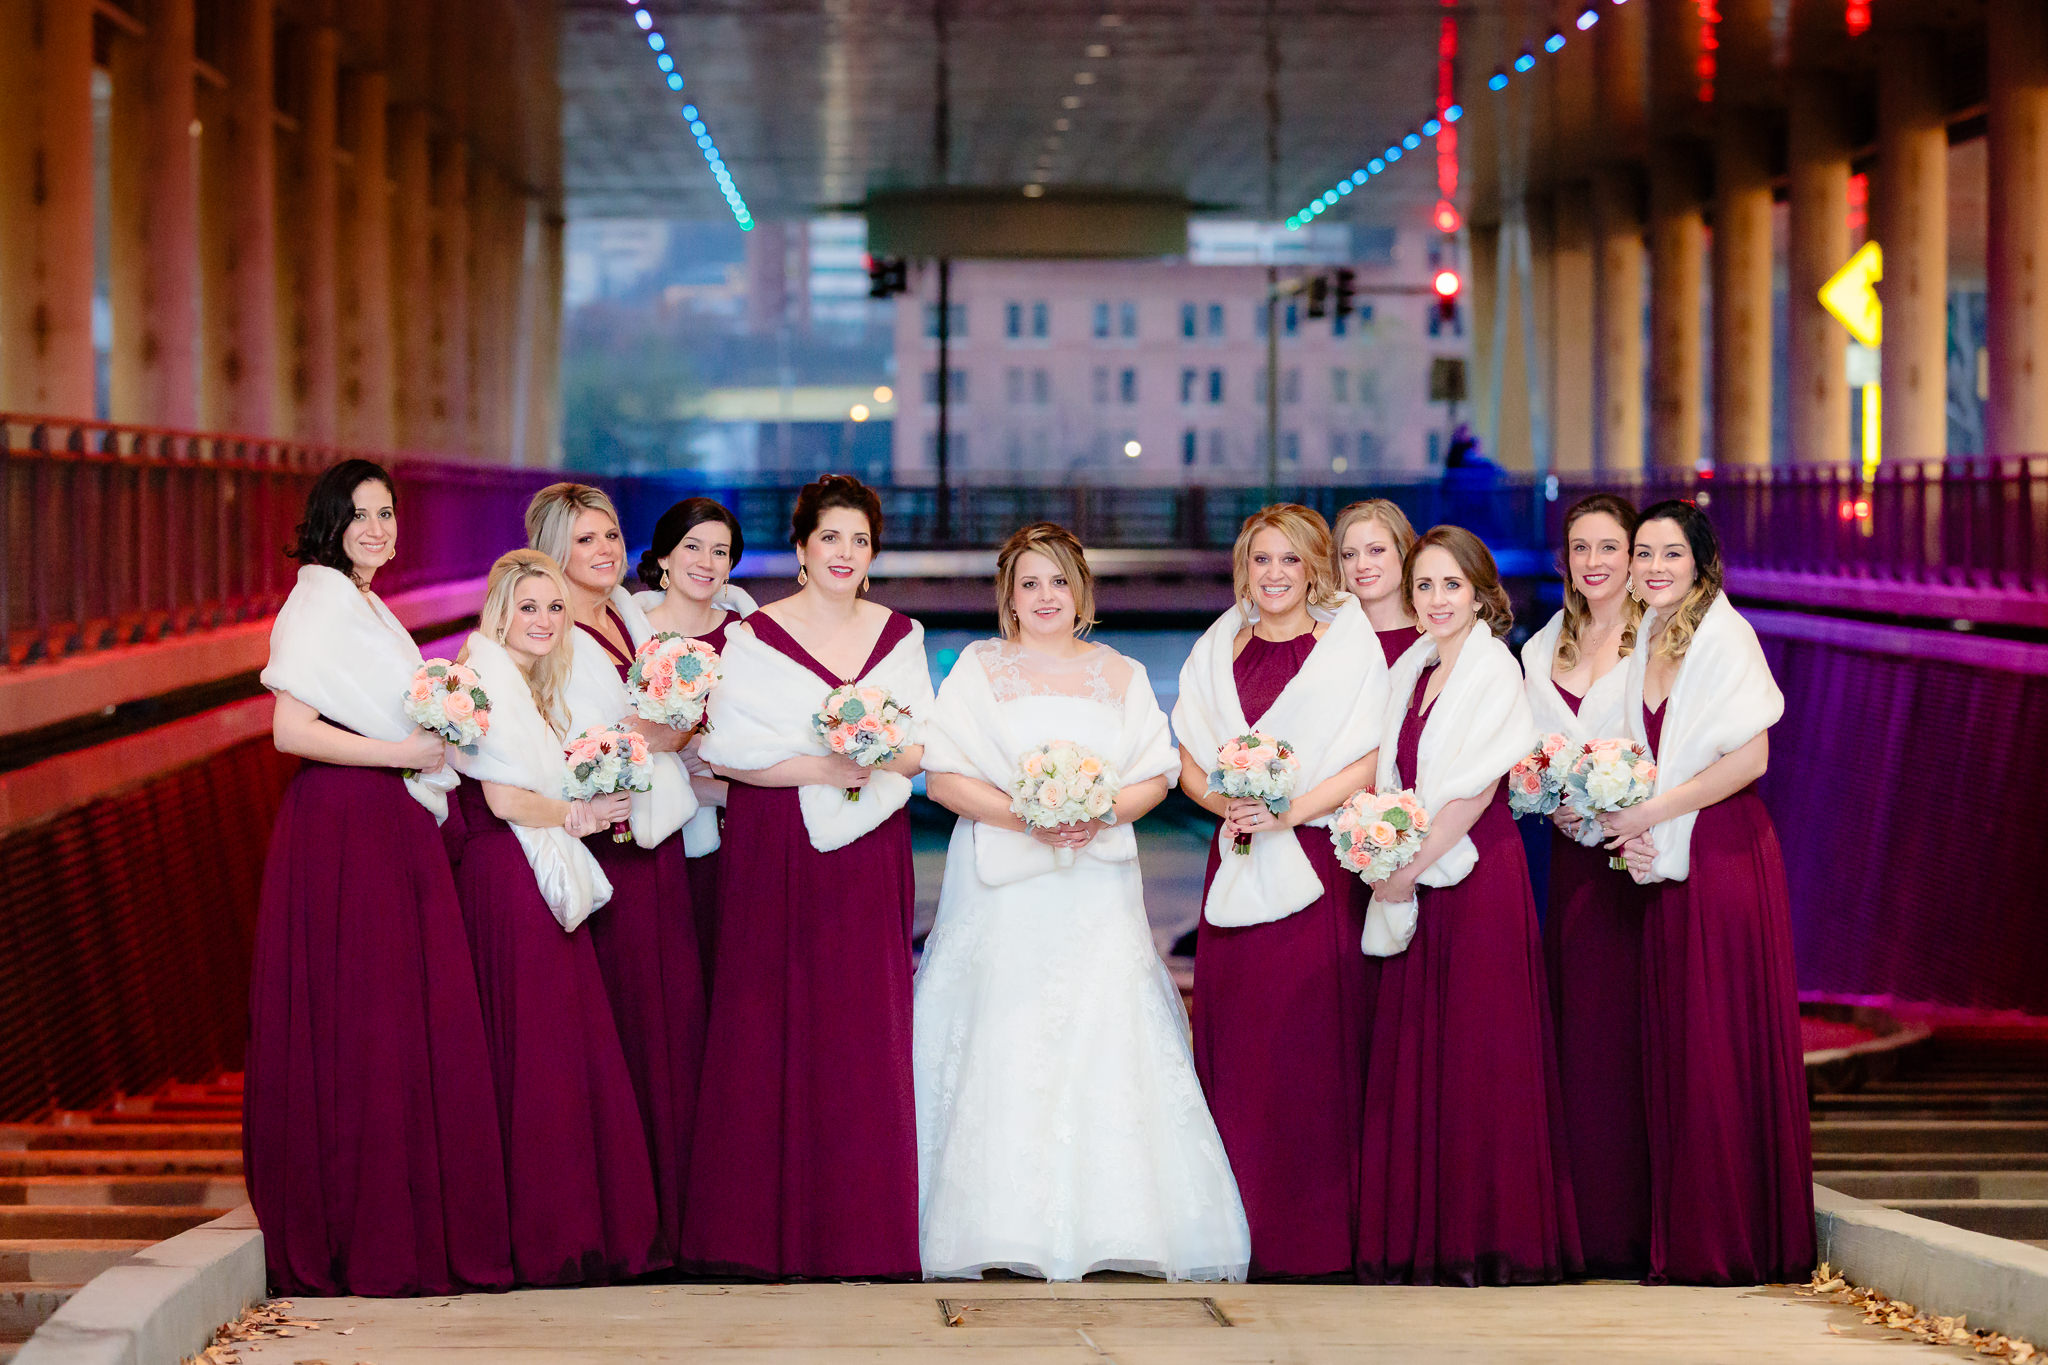 Bride with her bridesmaids in burgundy dresses and white fur shawls at the David L. Lawrence Convention Center